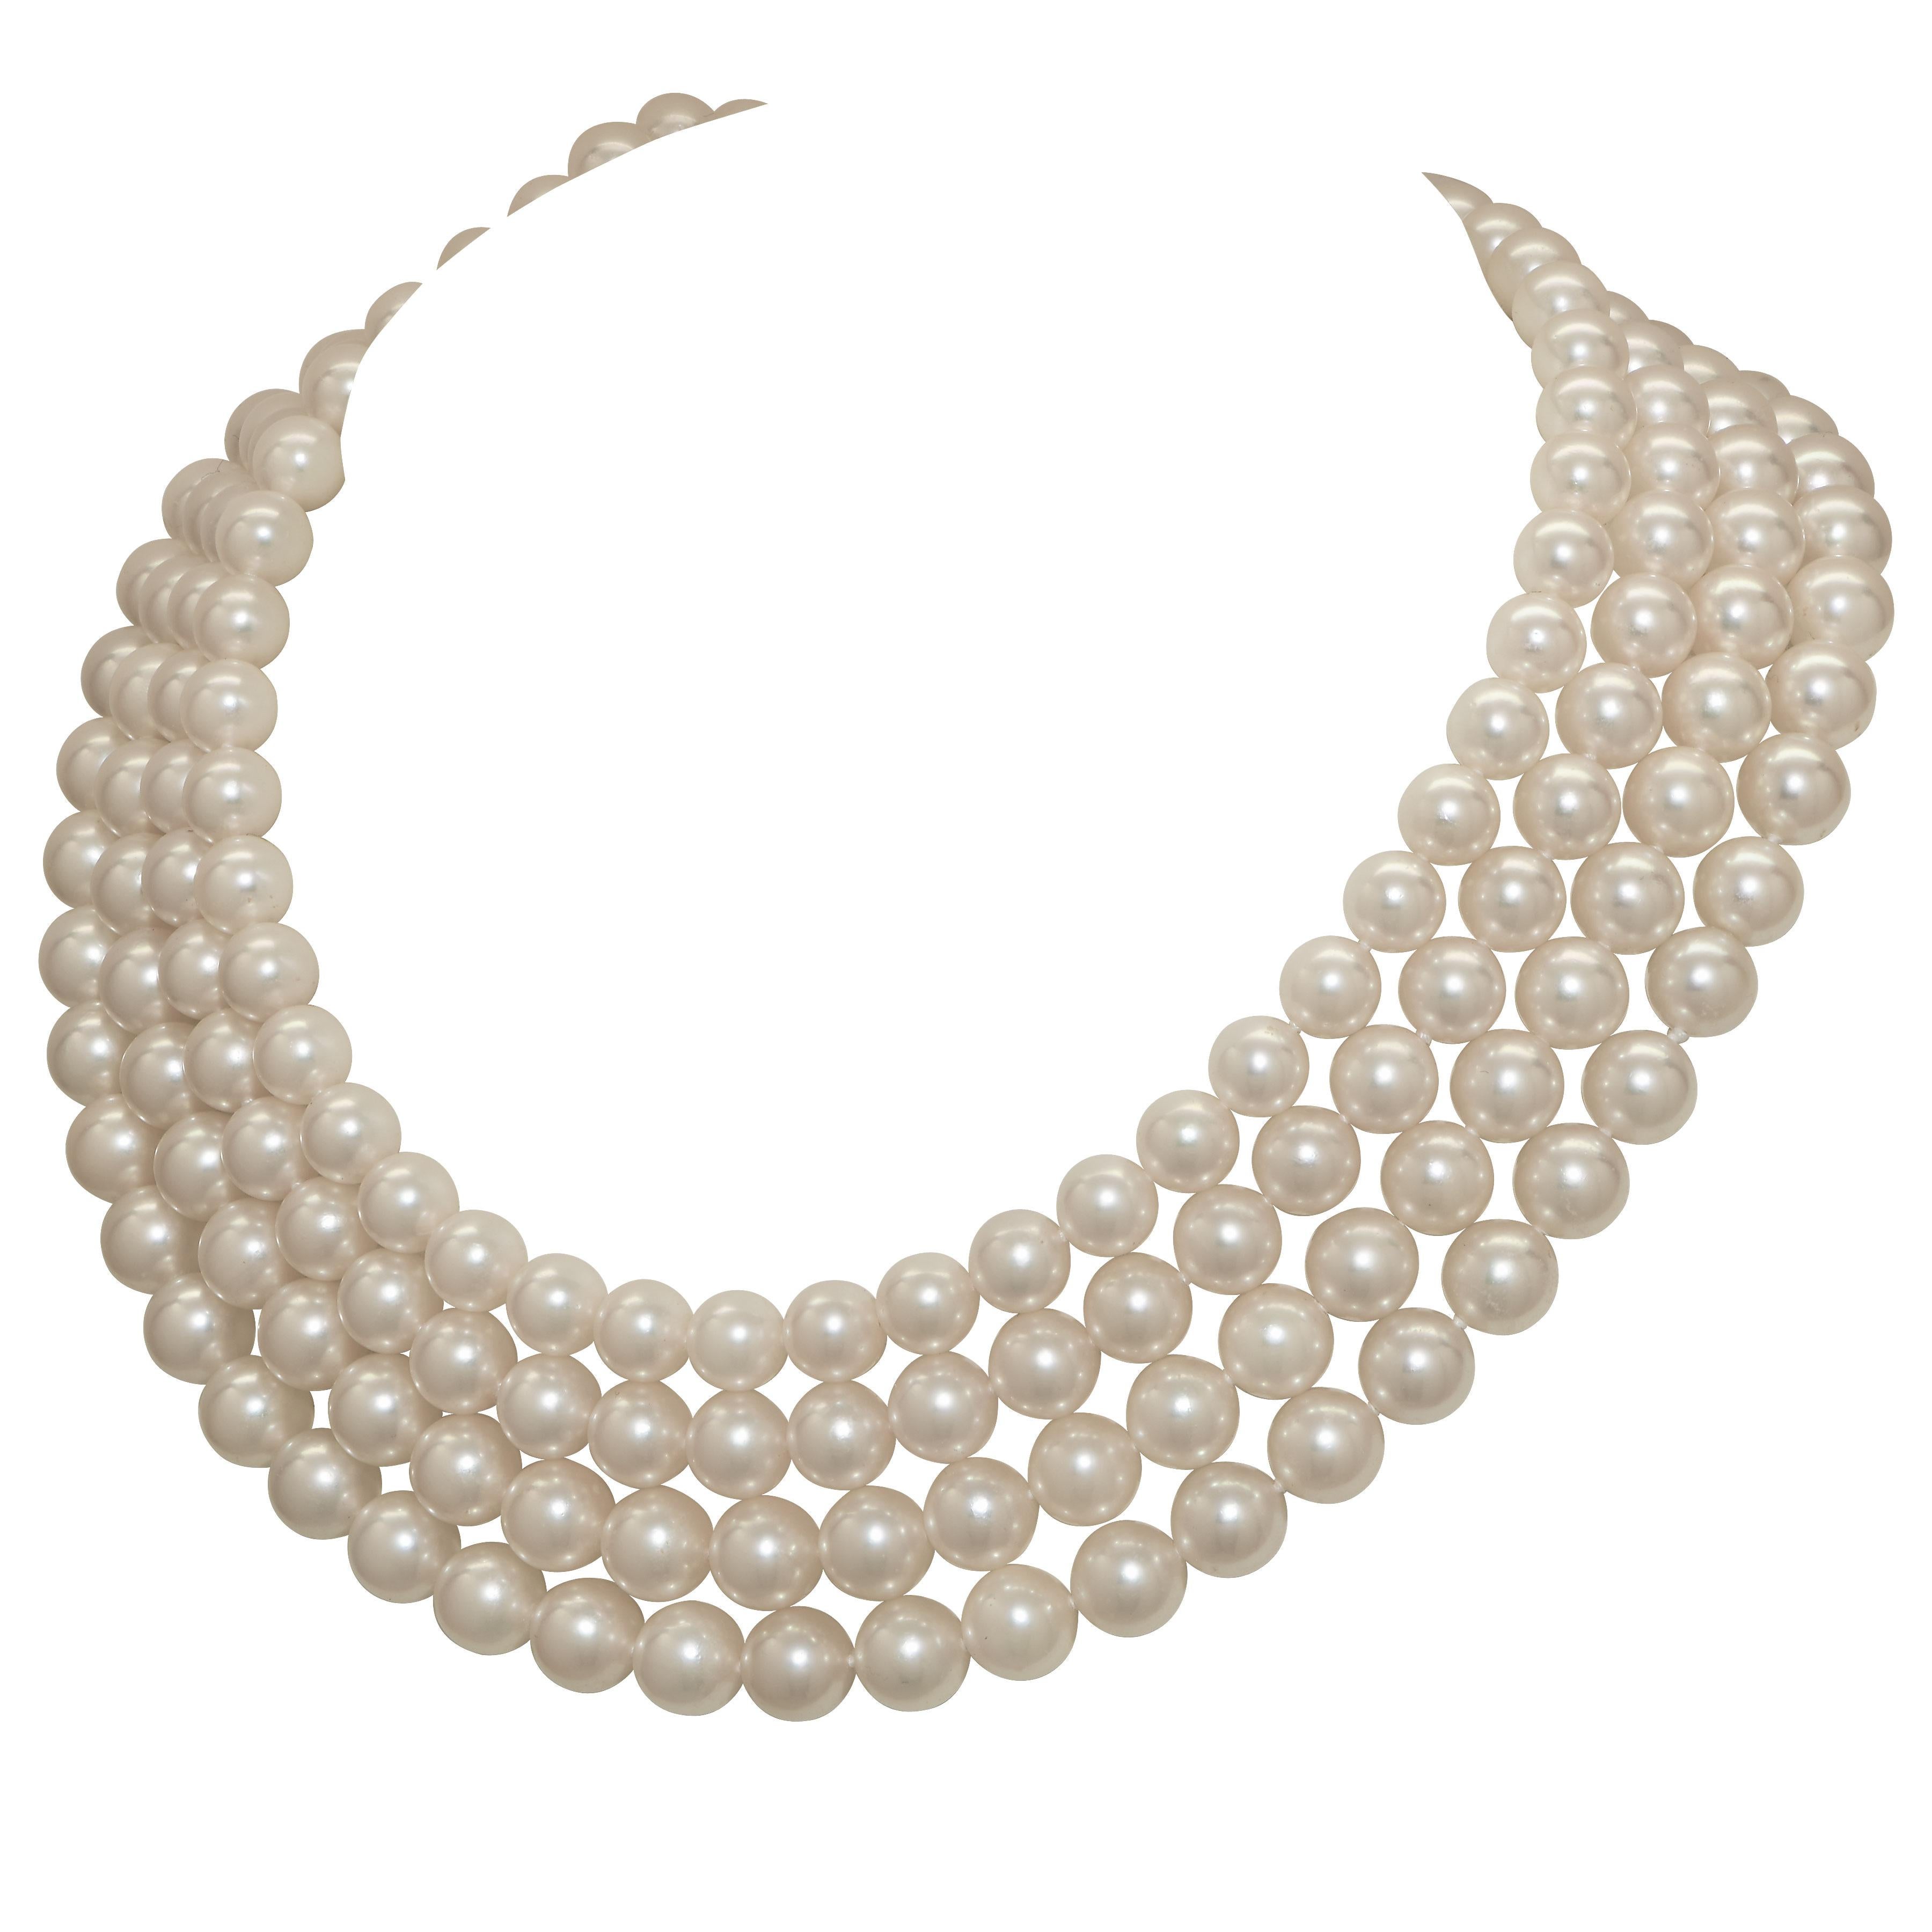 This four-strand Mikimoto Akoya pearl necklace is a masterpiece of elegance and luxury. The layout features four strands of meticulously arranged Akoya pearls,  ranging from 9mm down to 7.5mm, creating a graceful tapering effect that accentuates the